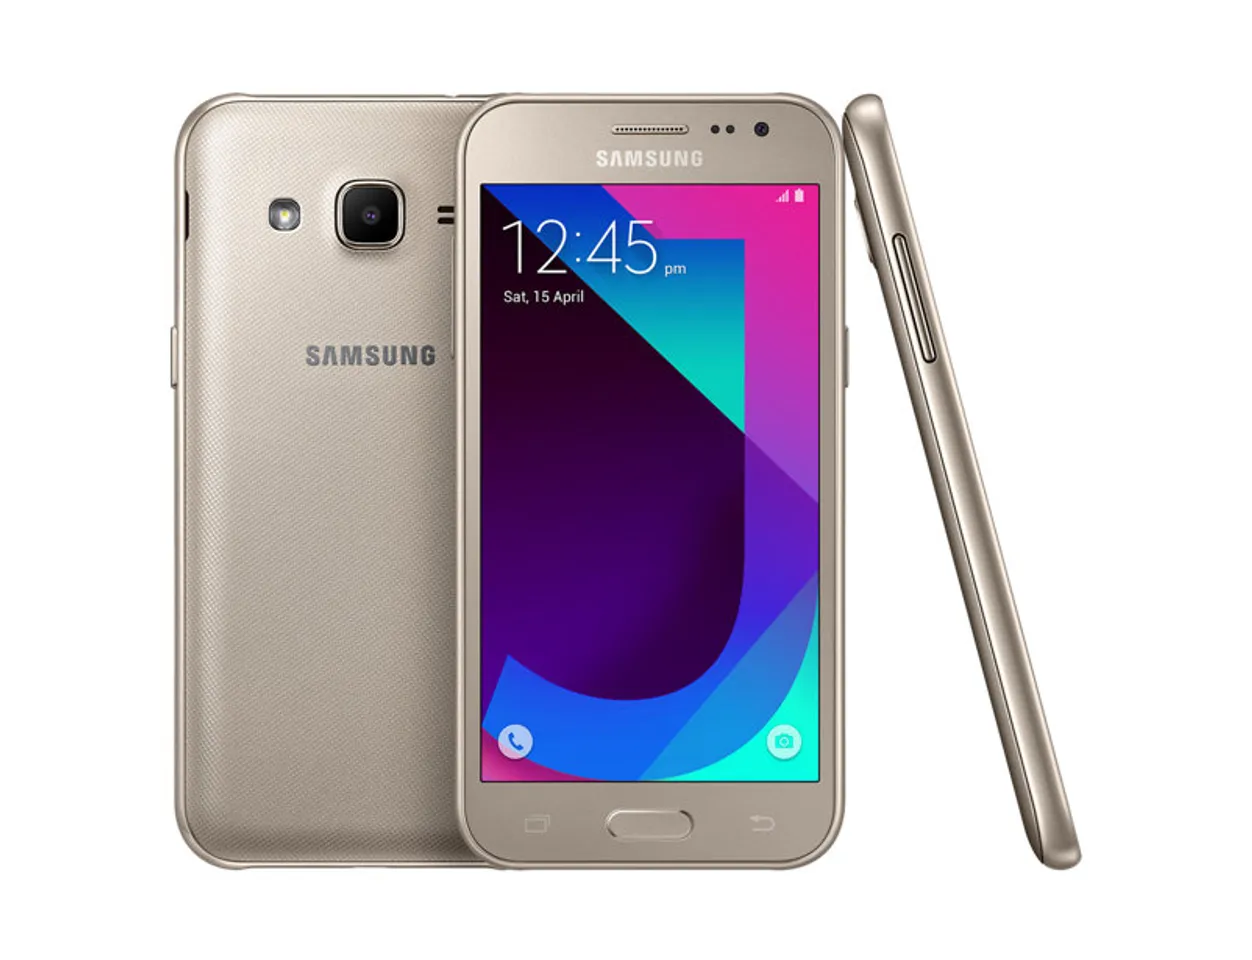 Samsung launches Galaxy J2(2017) with 4.7-inch Super AMOLED display in India